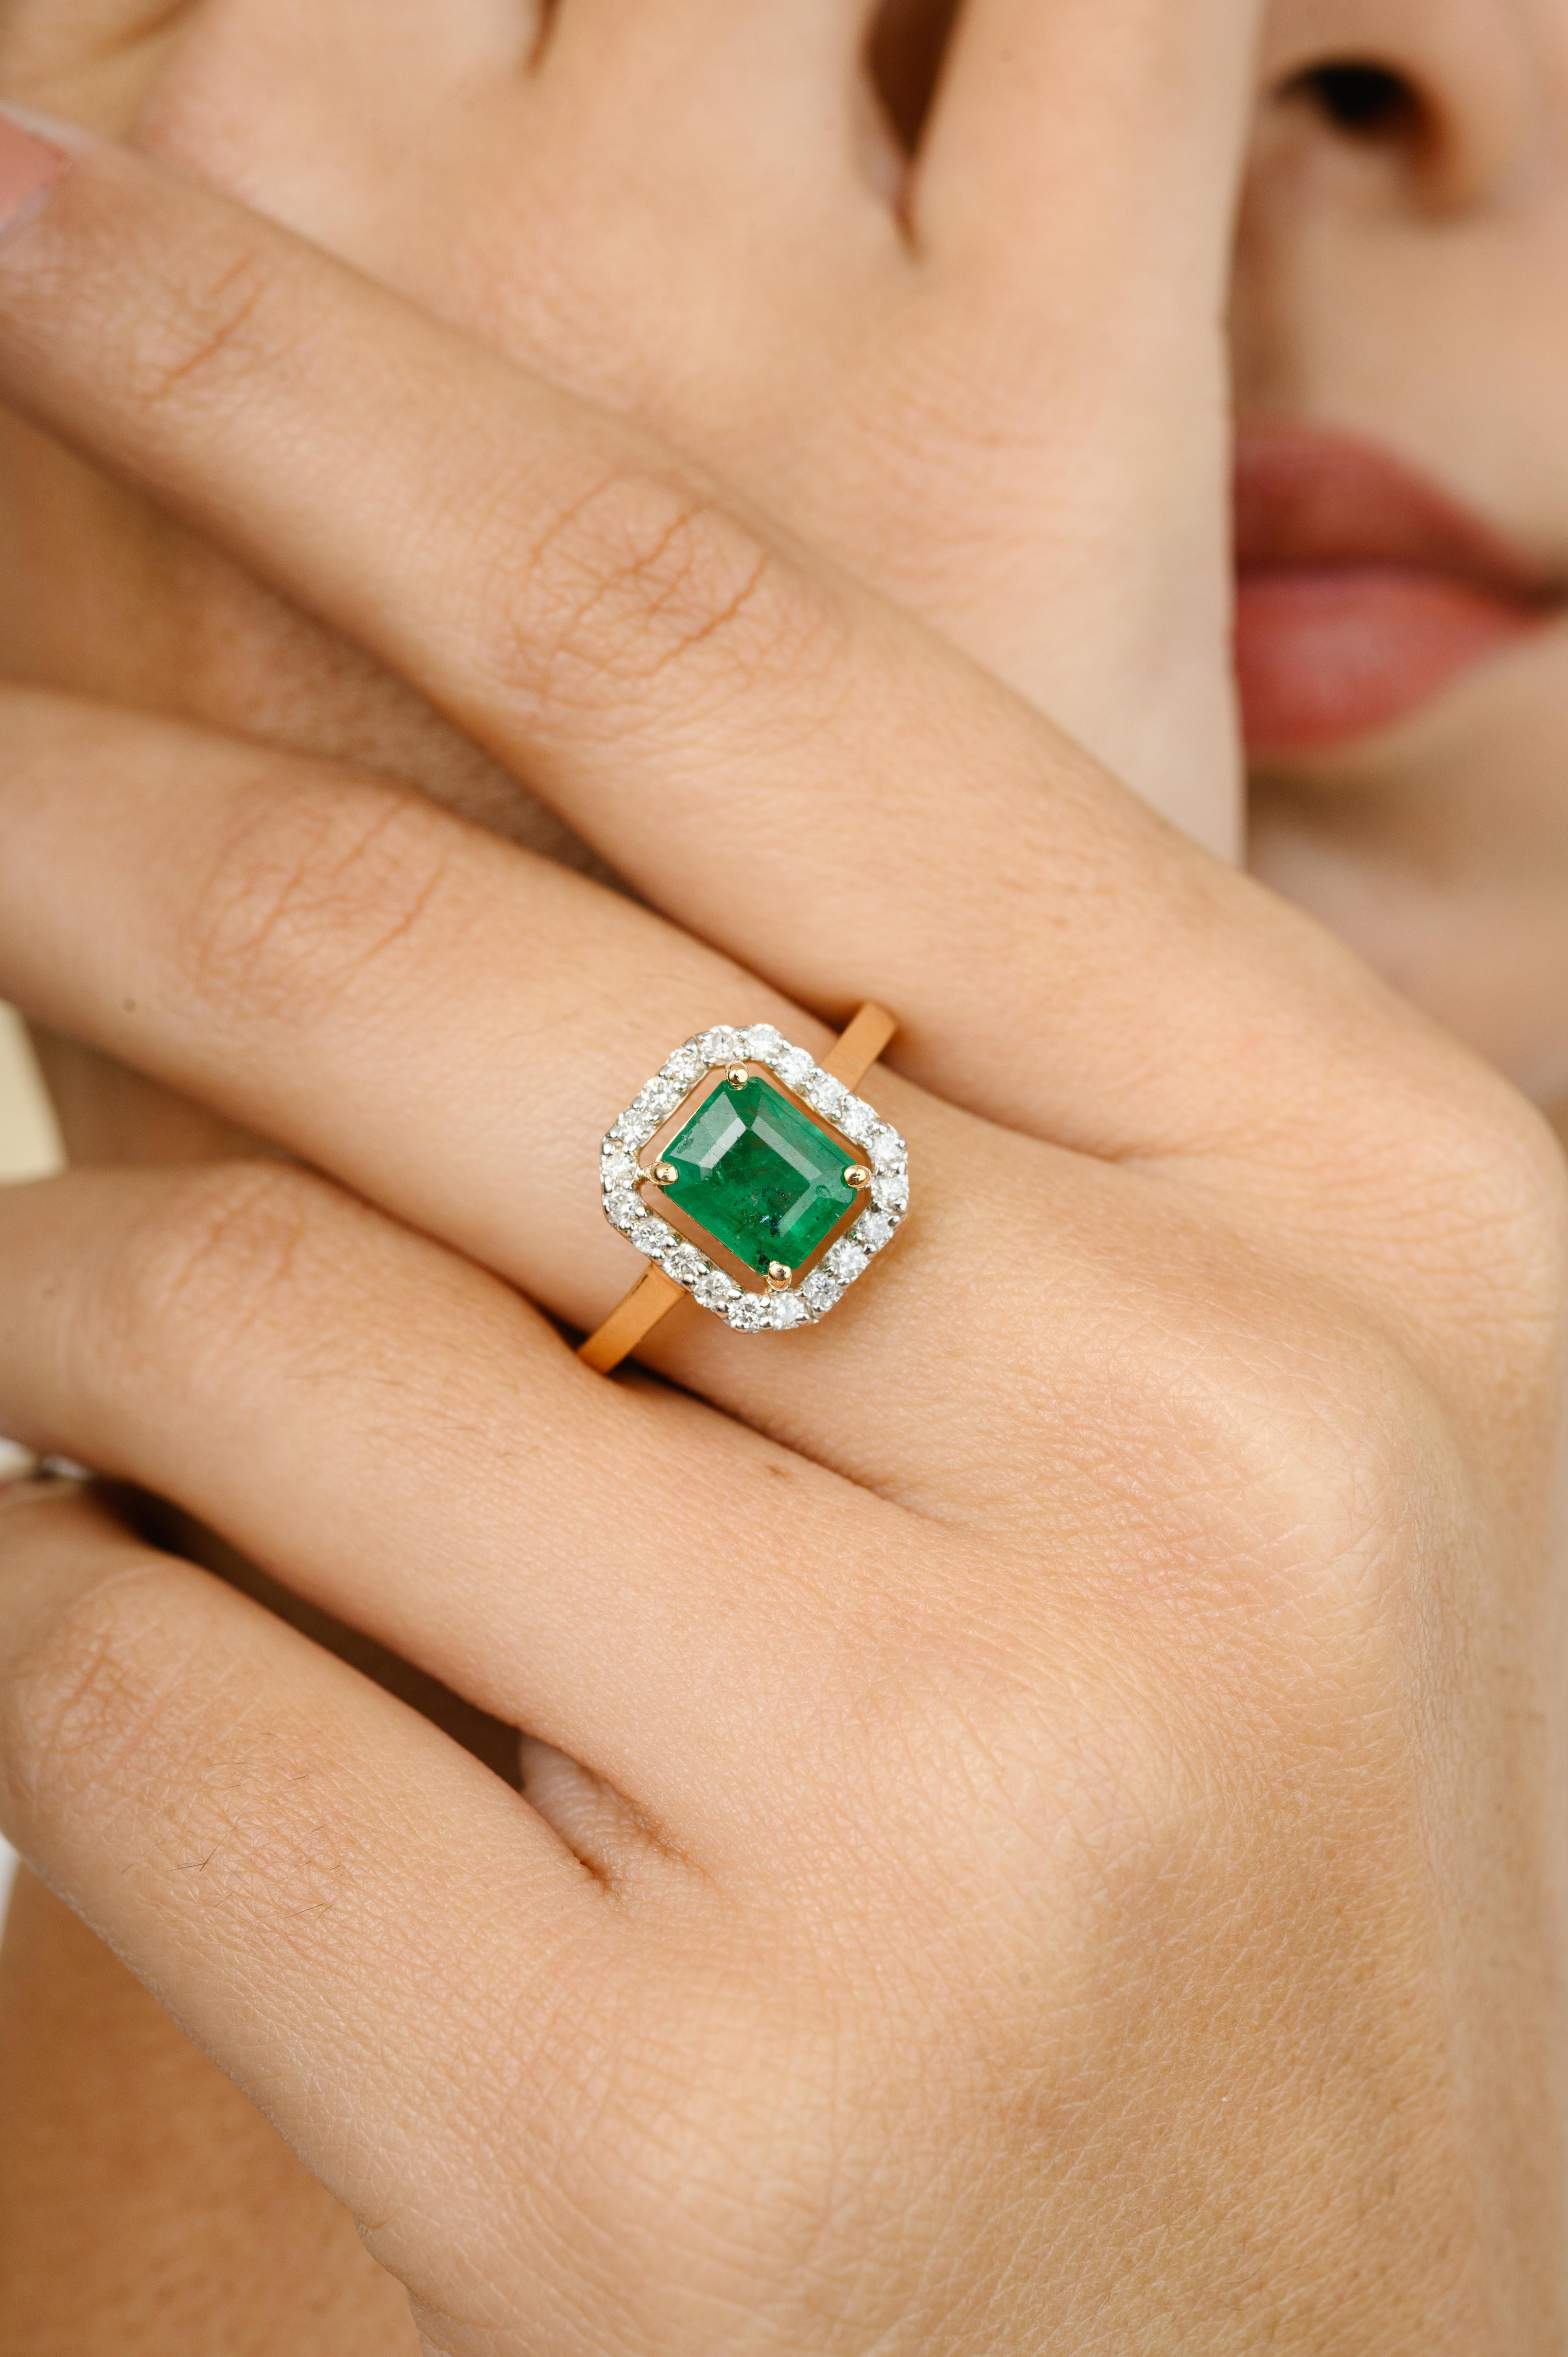 For Sale:  1.5 Carat Octagon Emerald Halo Diamond Wedding Ring in 18k Yellow Gold 2